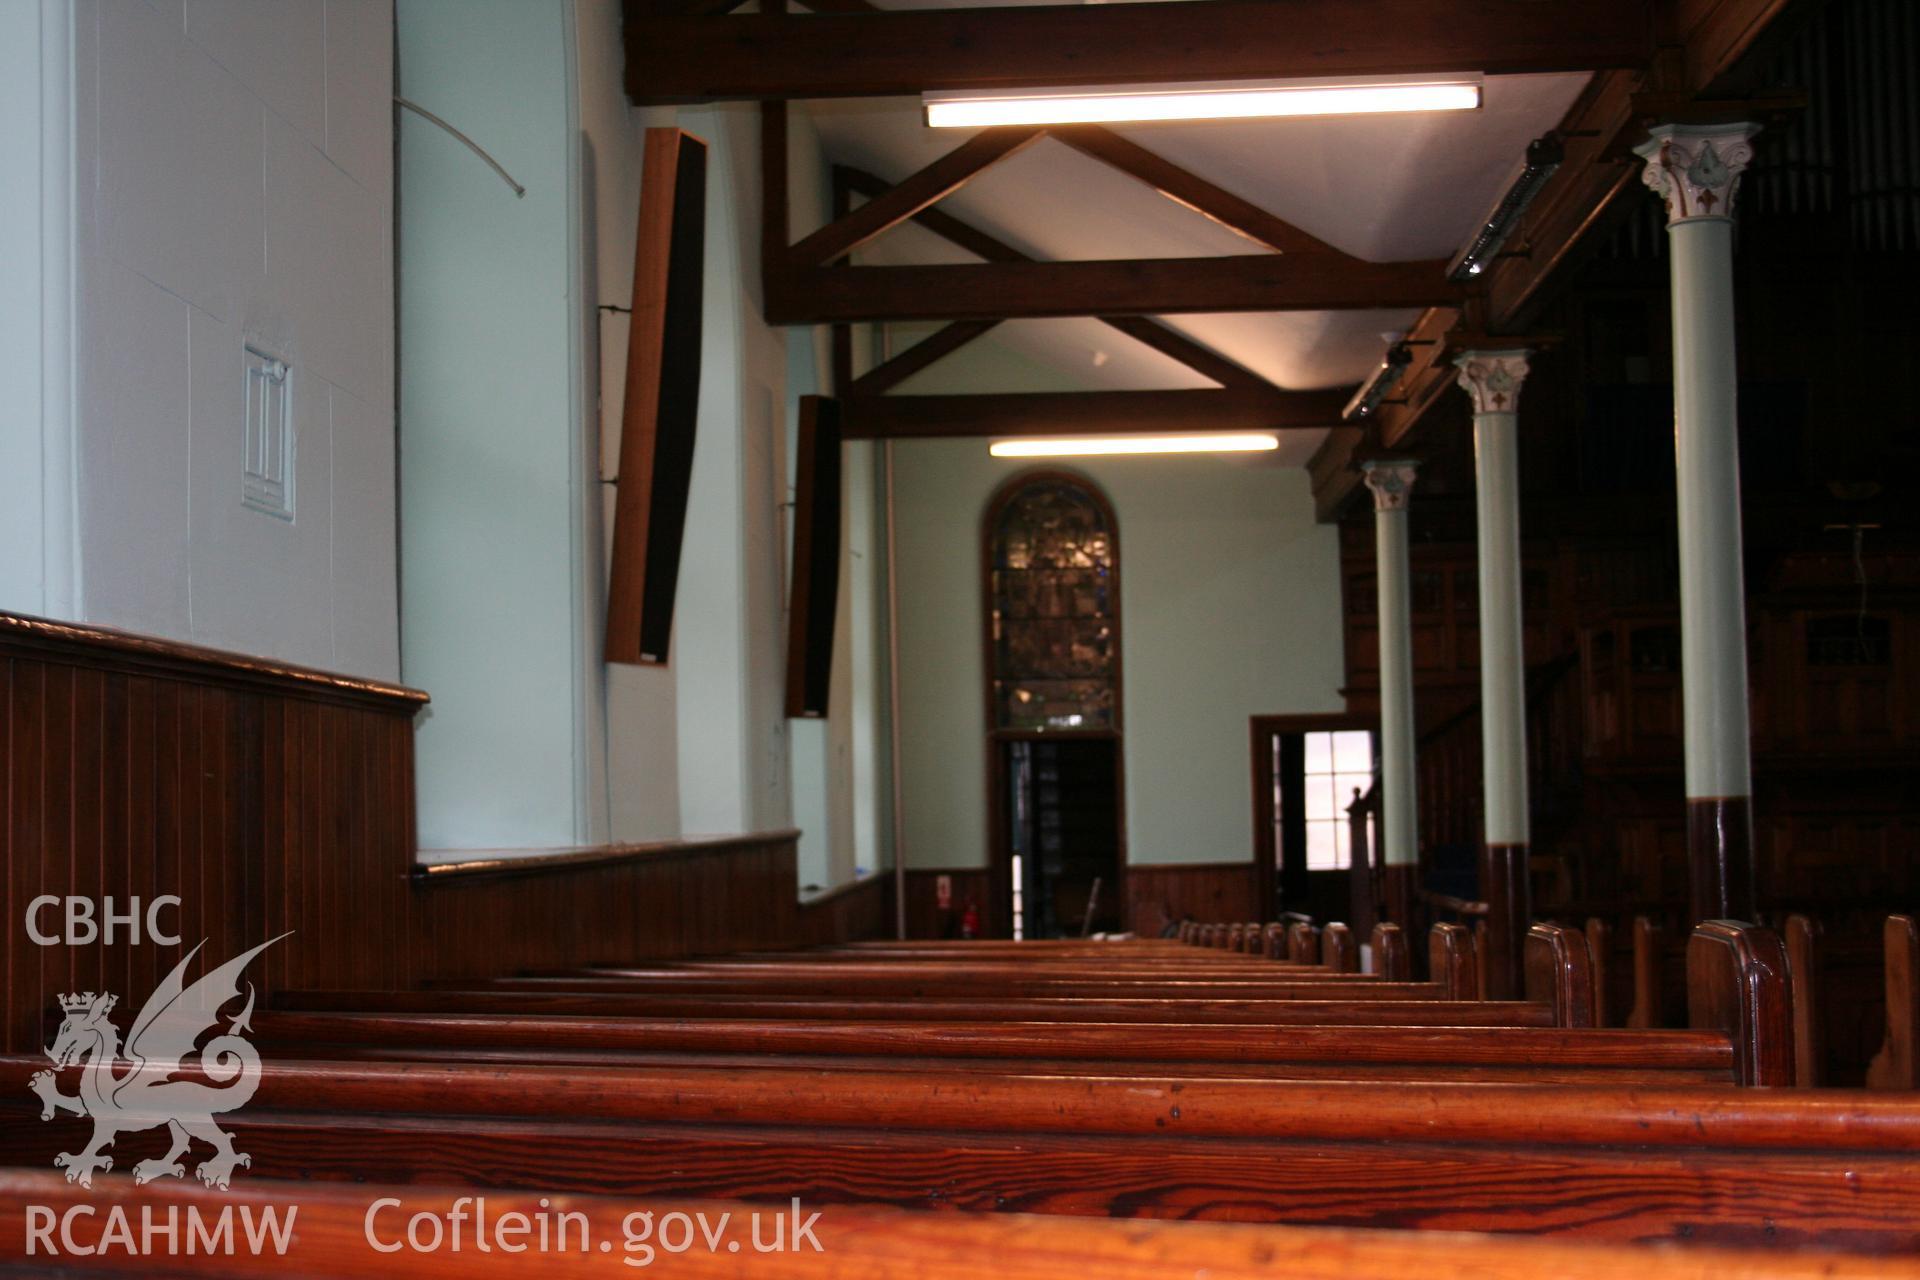 Hanbury Road baptist chapel, Bargoed, digital colour photograph showing interior, received in the course of Emergency Recording case ref no RCS2/1/2247.